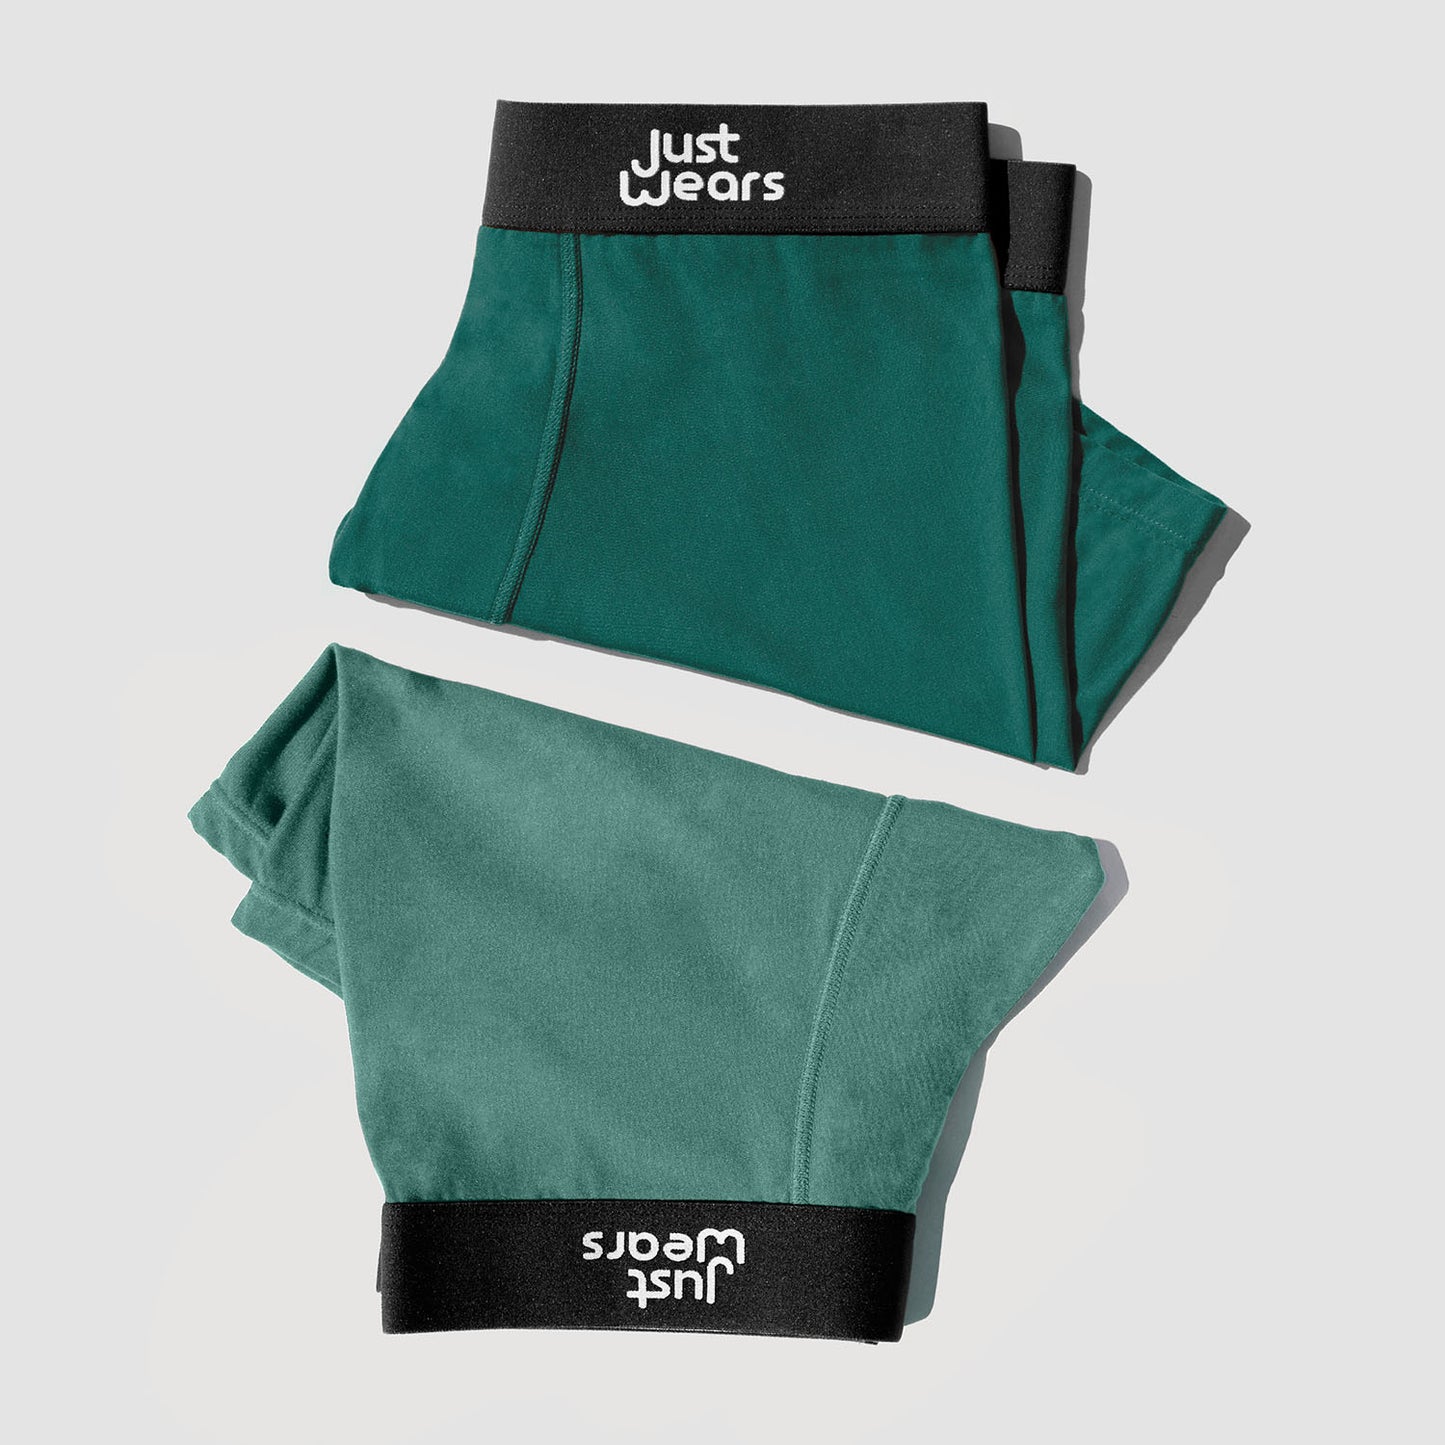 Boxer Briefs Duo Pack (color - Dark Green & Light Green)